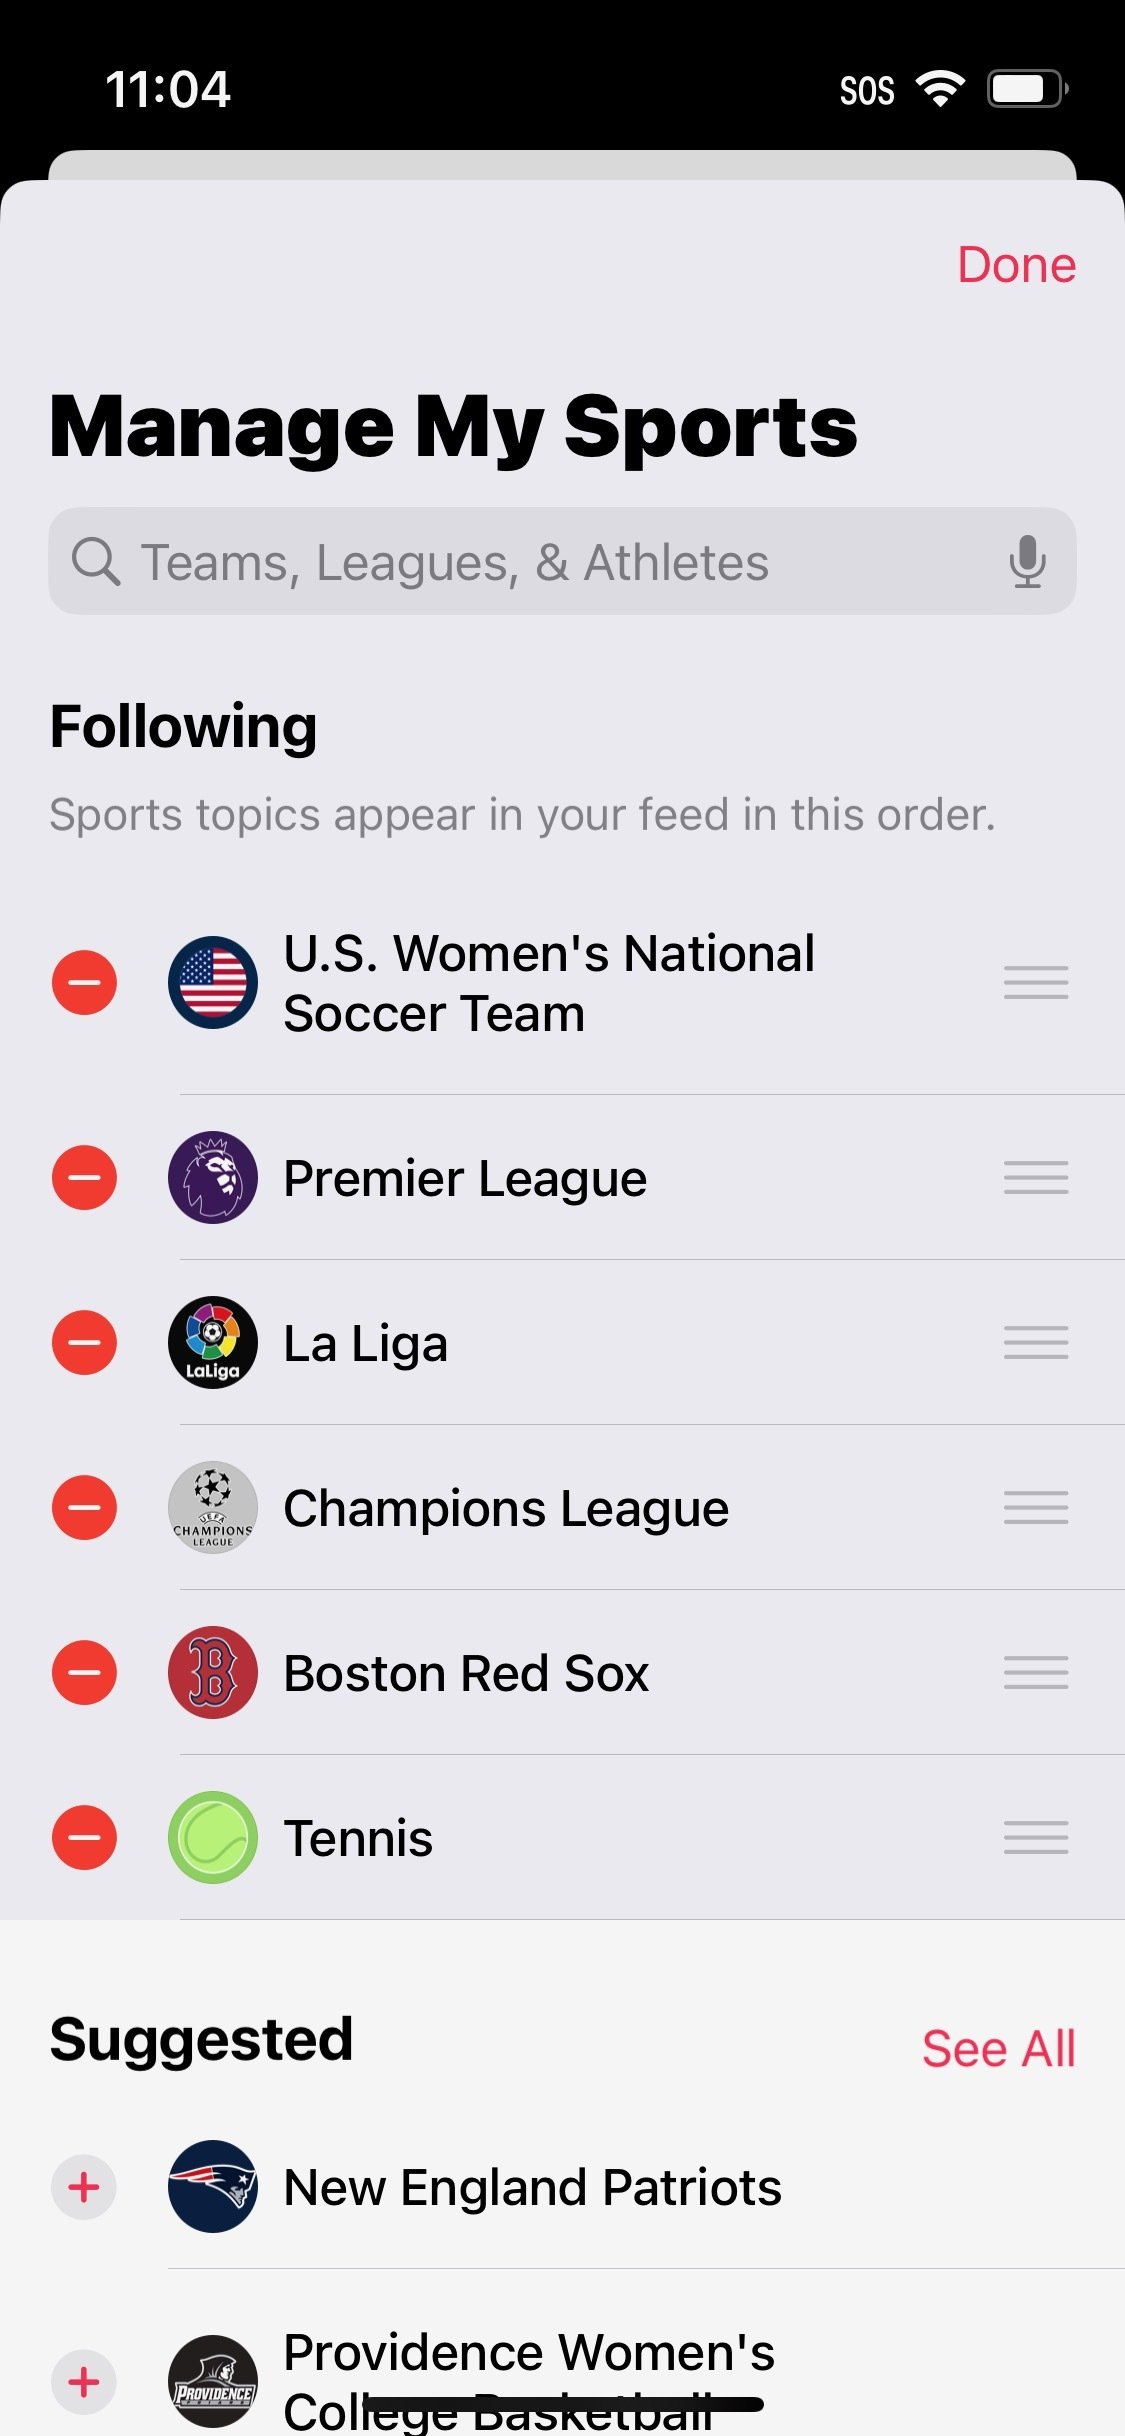 Image of teams/leagues preferences in the "Following" section of My Sports